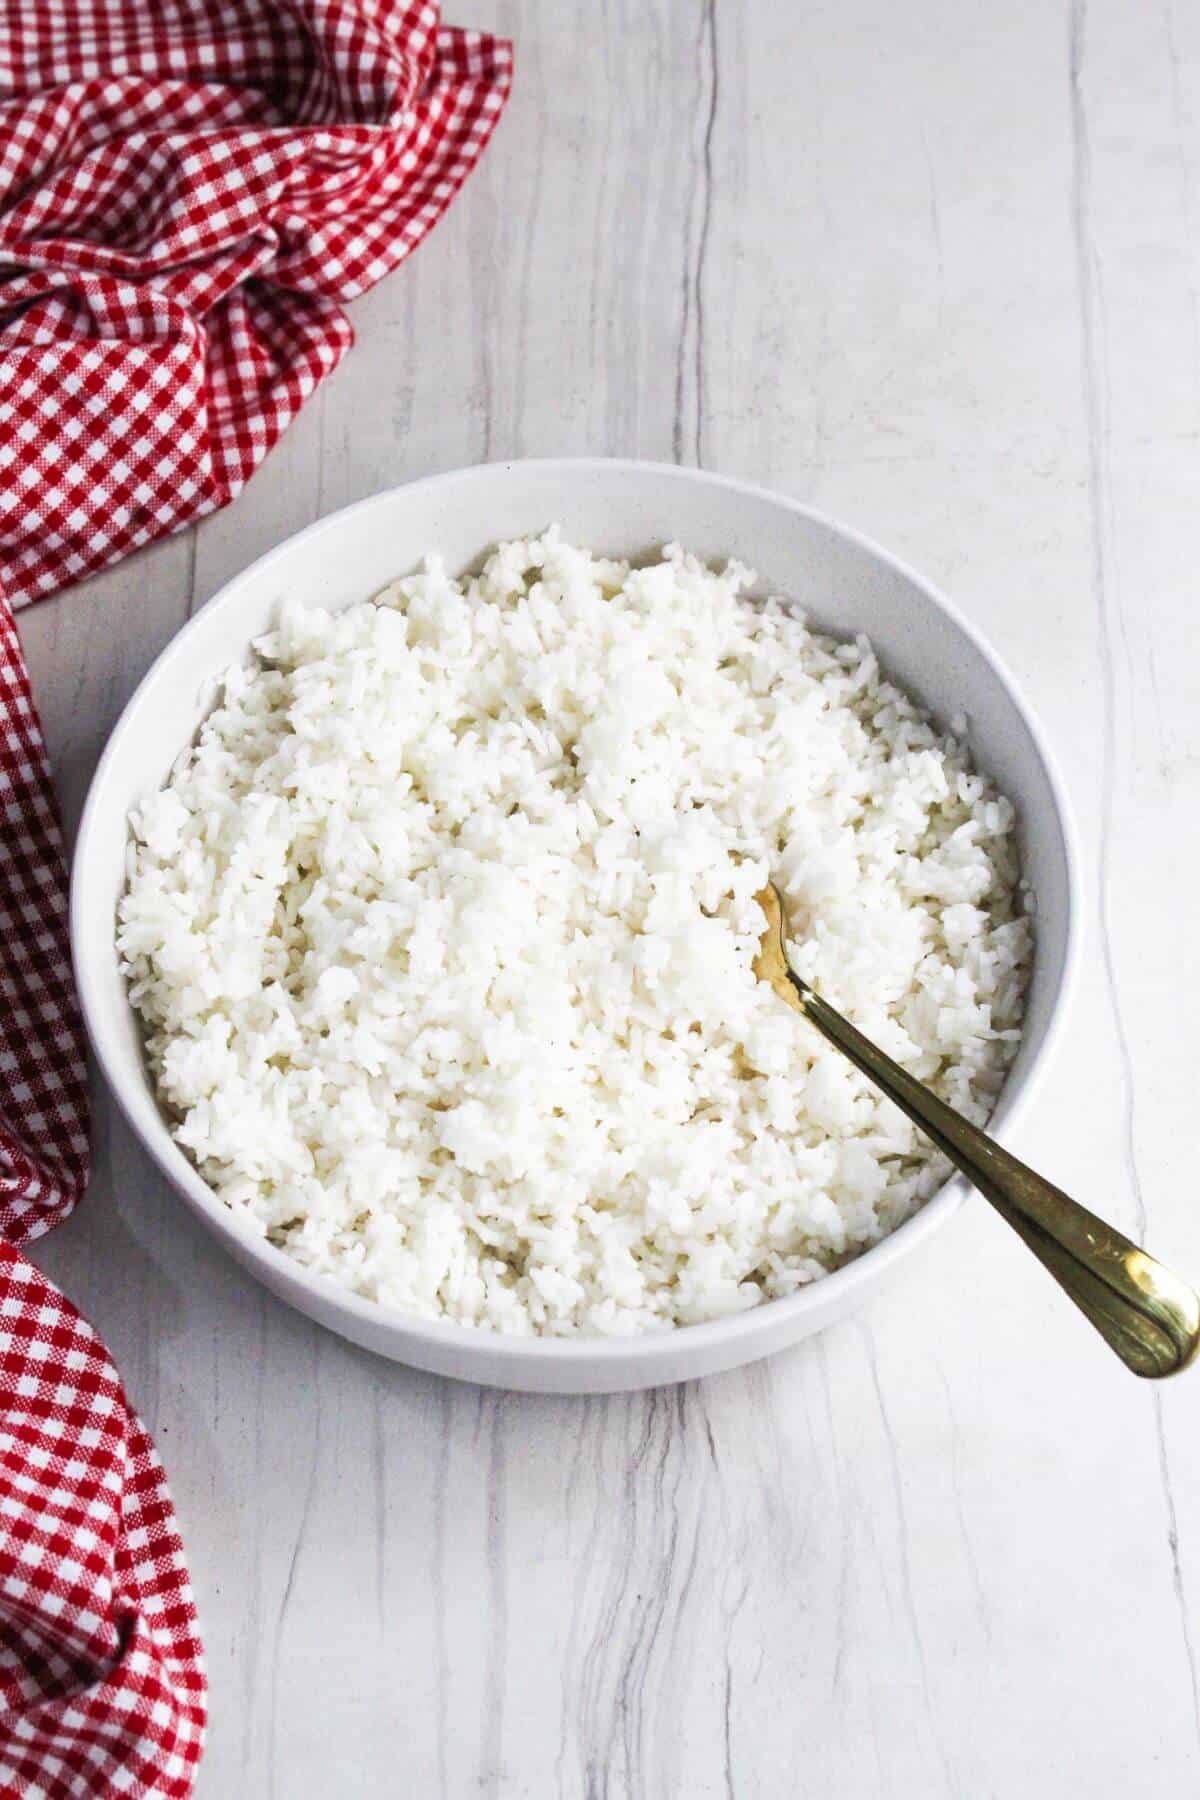 White rice in a bowl on a wooden table.